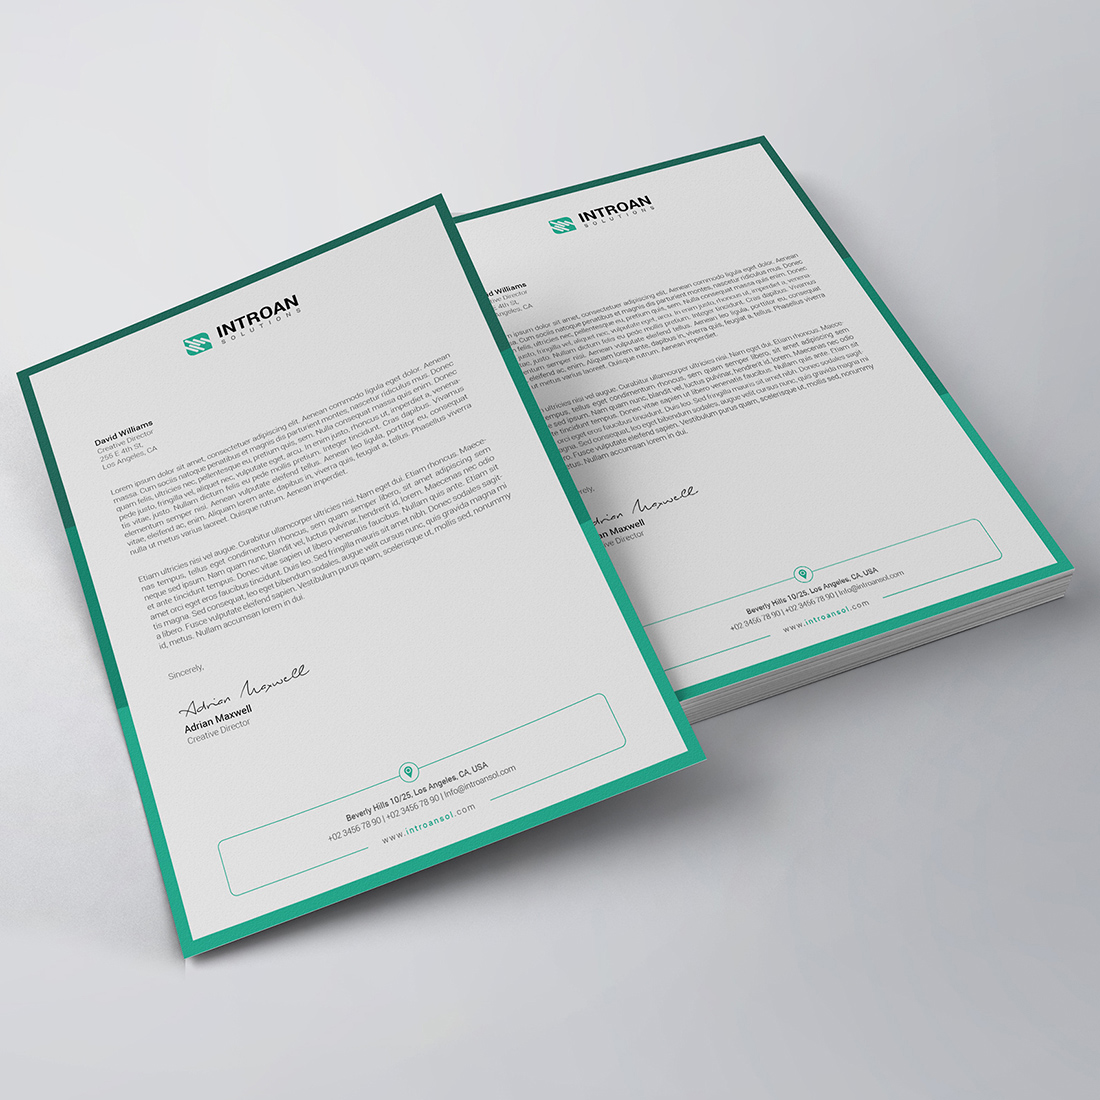 Clean Letterhead Template preview image.